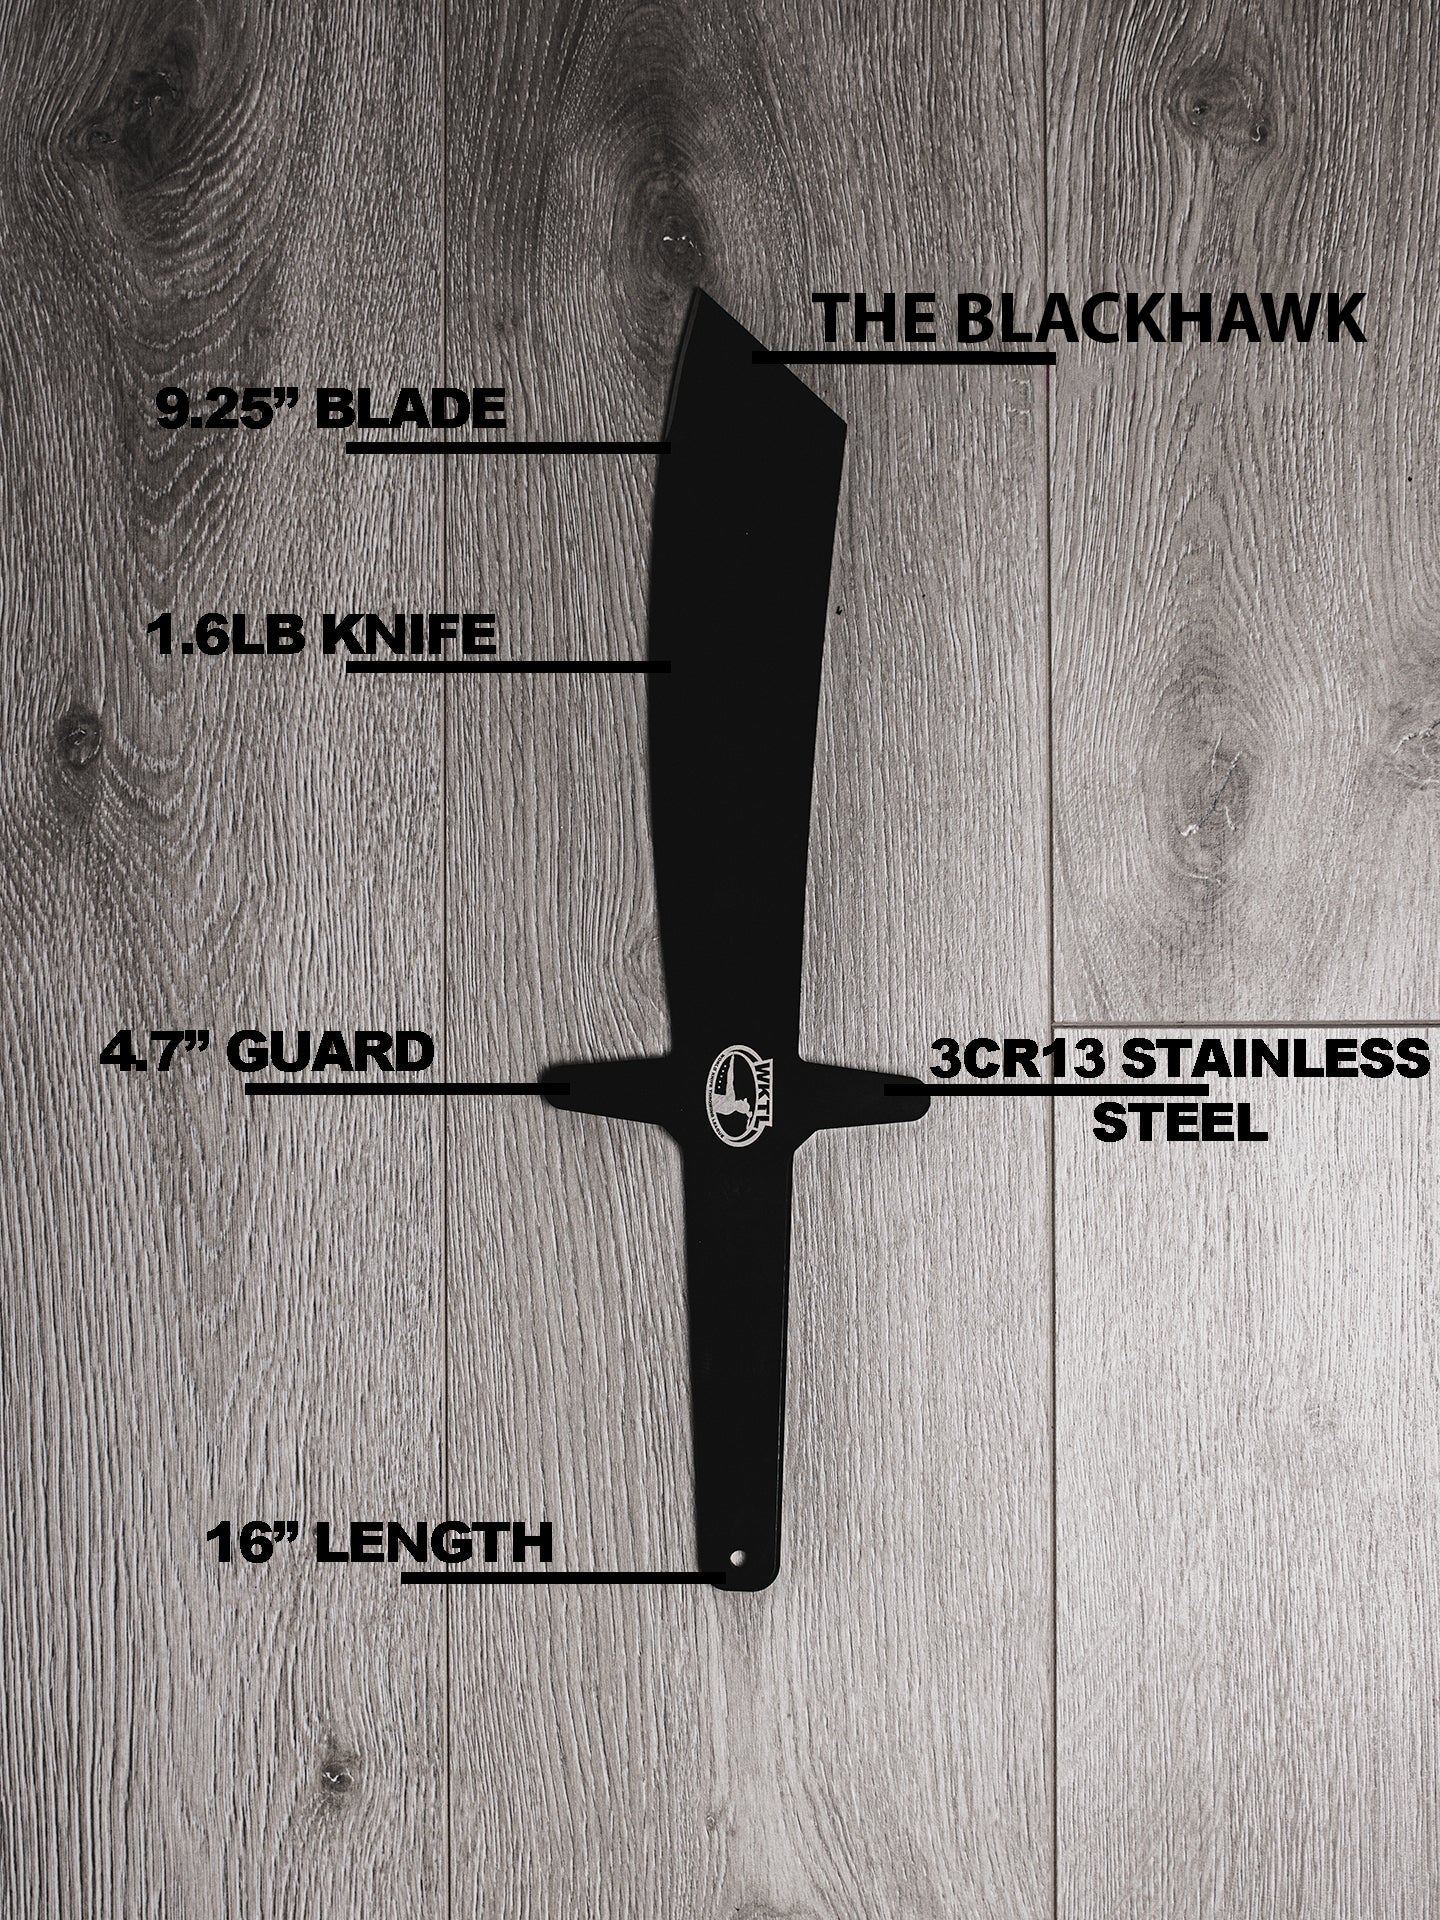 World Knife Throwing League (WKTL) Certified Toro Competition Throwing Knife, The Blackhawk Specifications